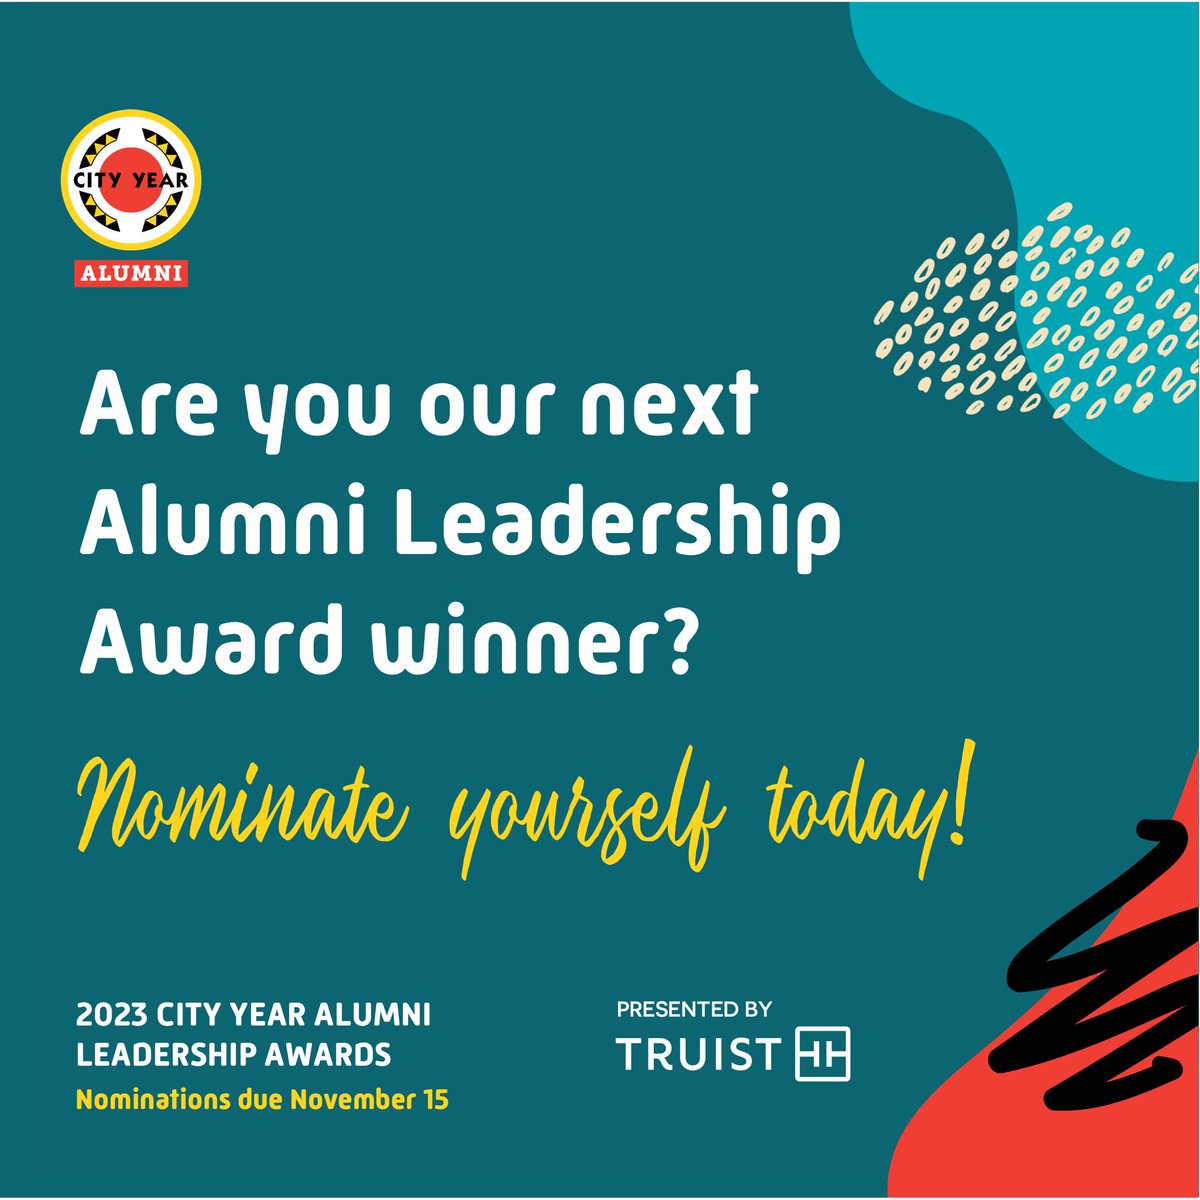 There is still time to nominate an #alumni or yourself for the Alumni Leadership Awards! Fill out your nomination form today! loom.ly/oZ3M9iA #leadership #alumni #cityyear #AmeriCorps